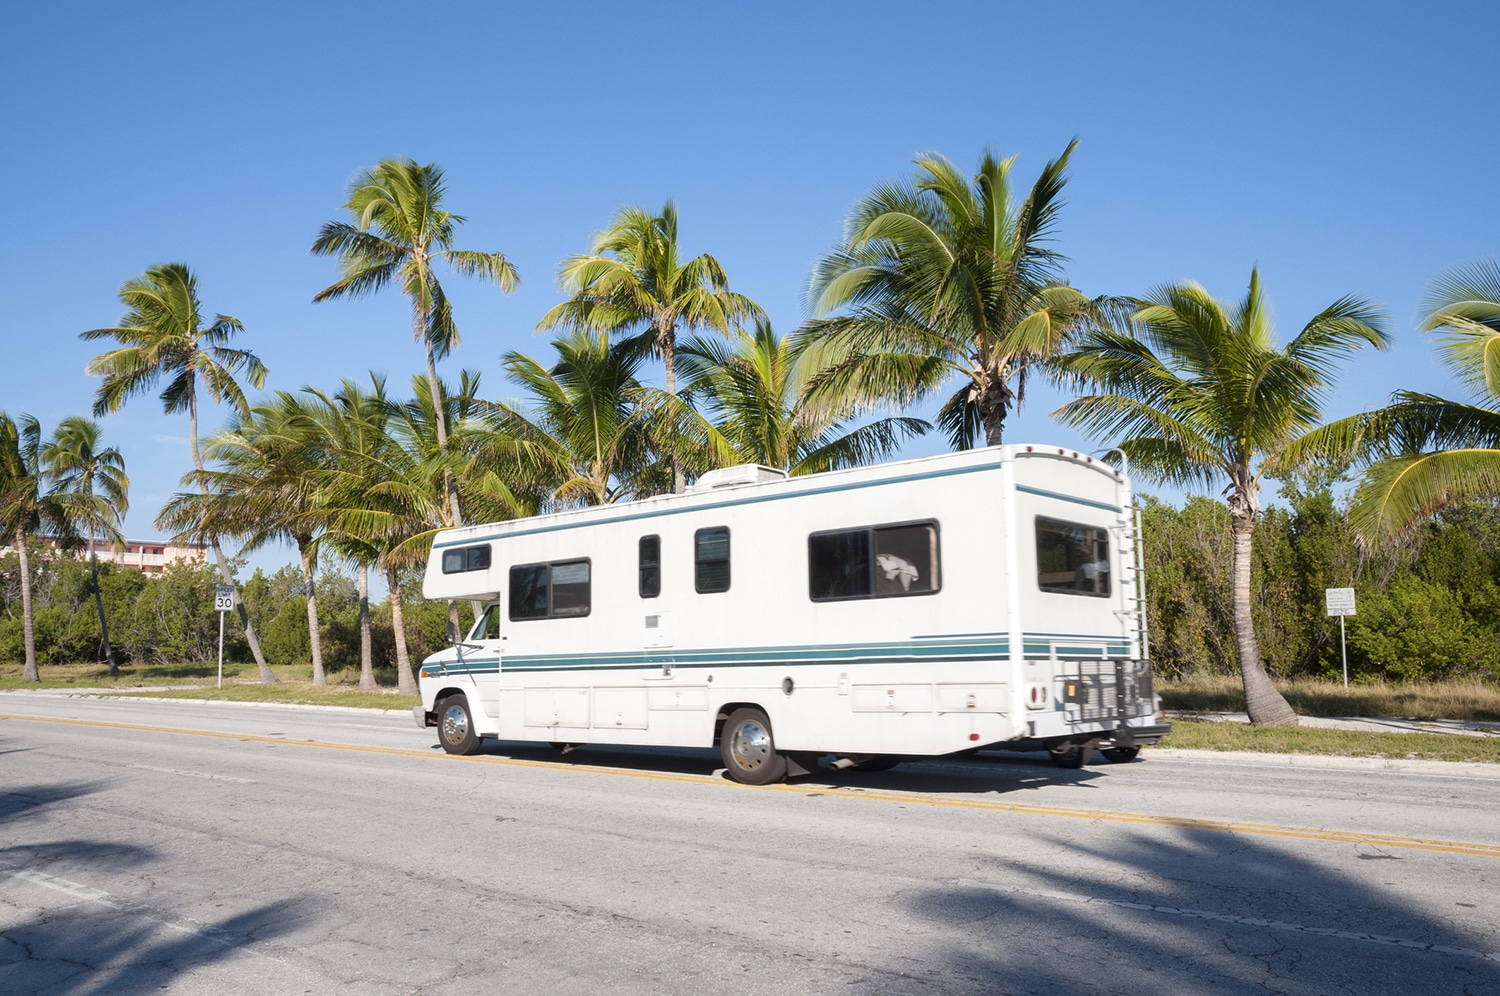 Motorhome parked near some palm trees